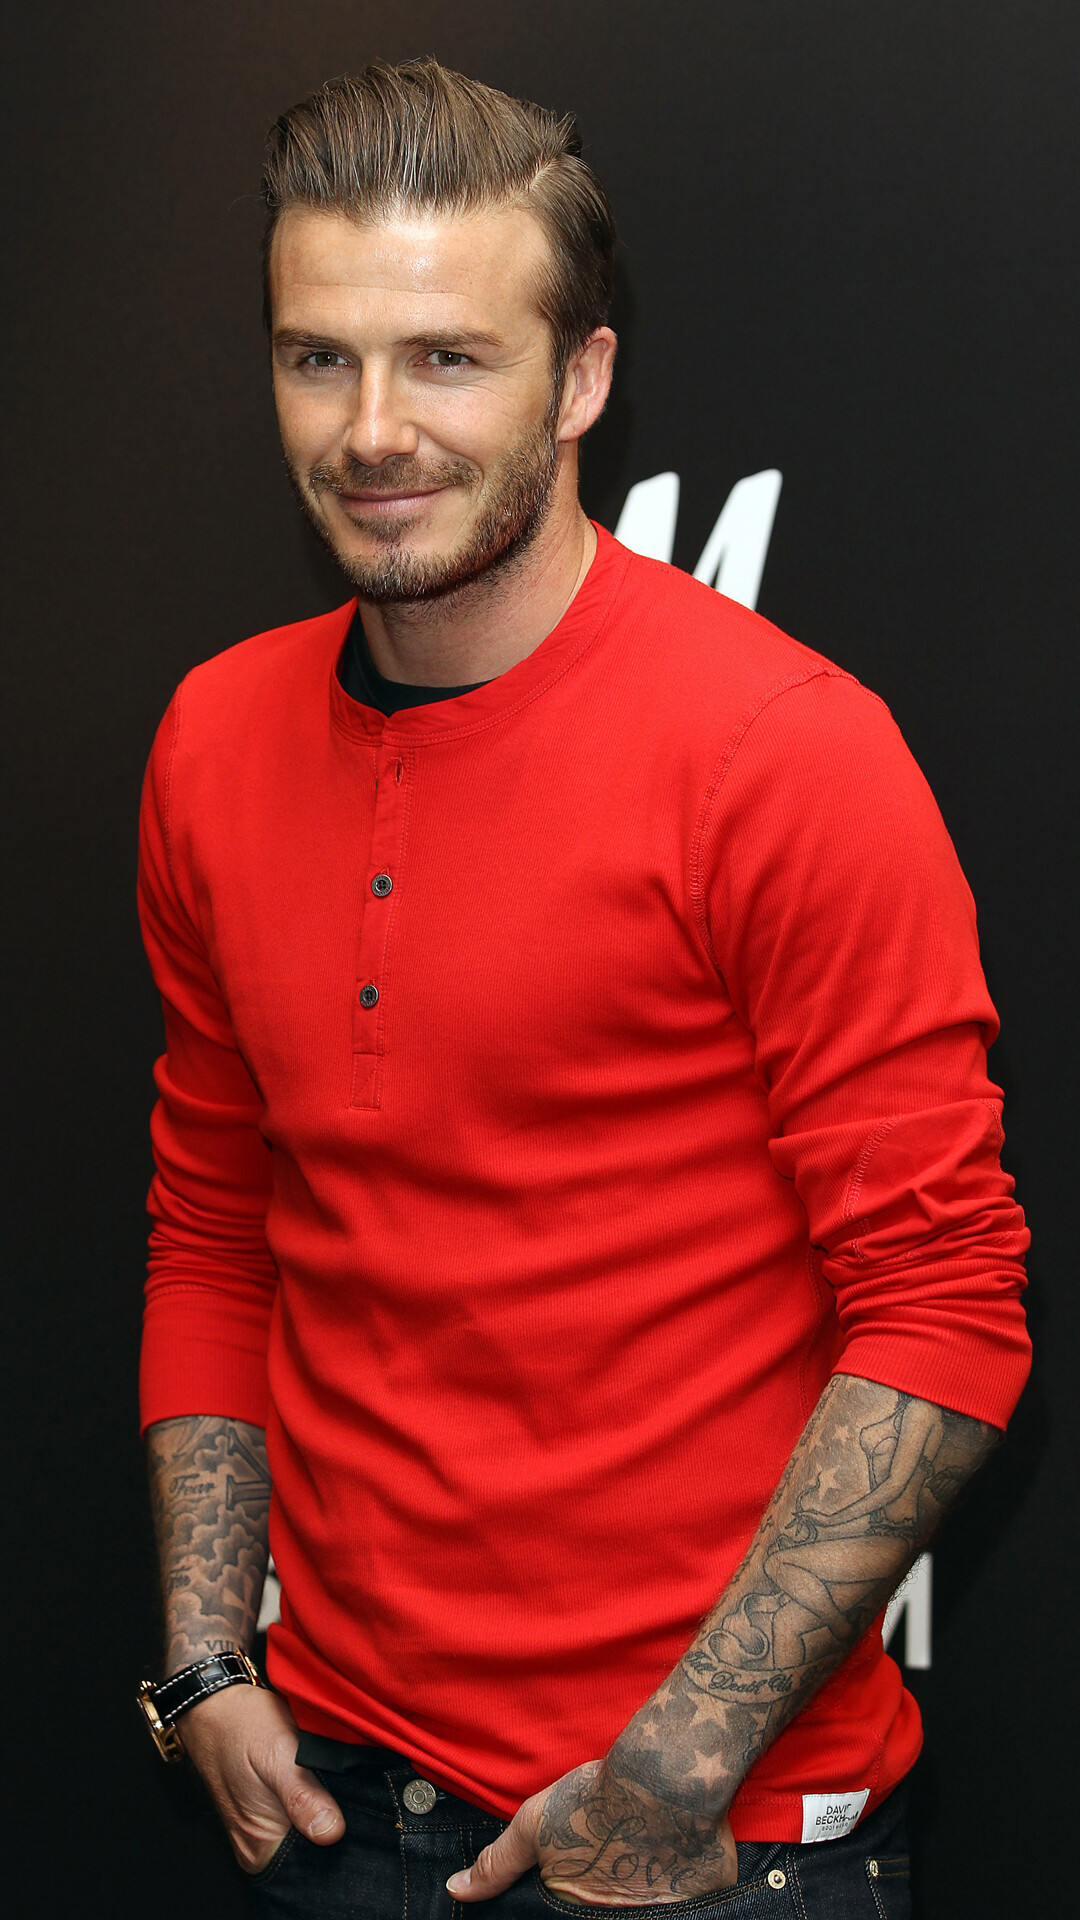 David Beckham: Made a winning return in a Milan shirt in a victory over Genoa on 6 January 2010. 1080x1920 Full HD Background.